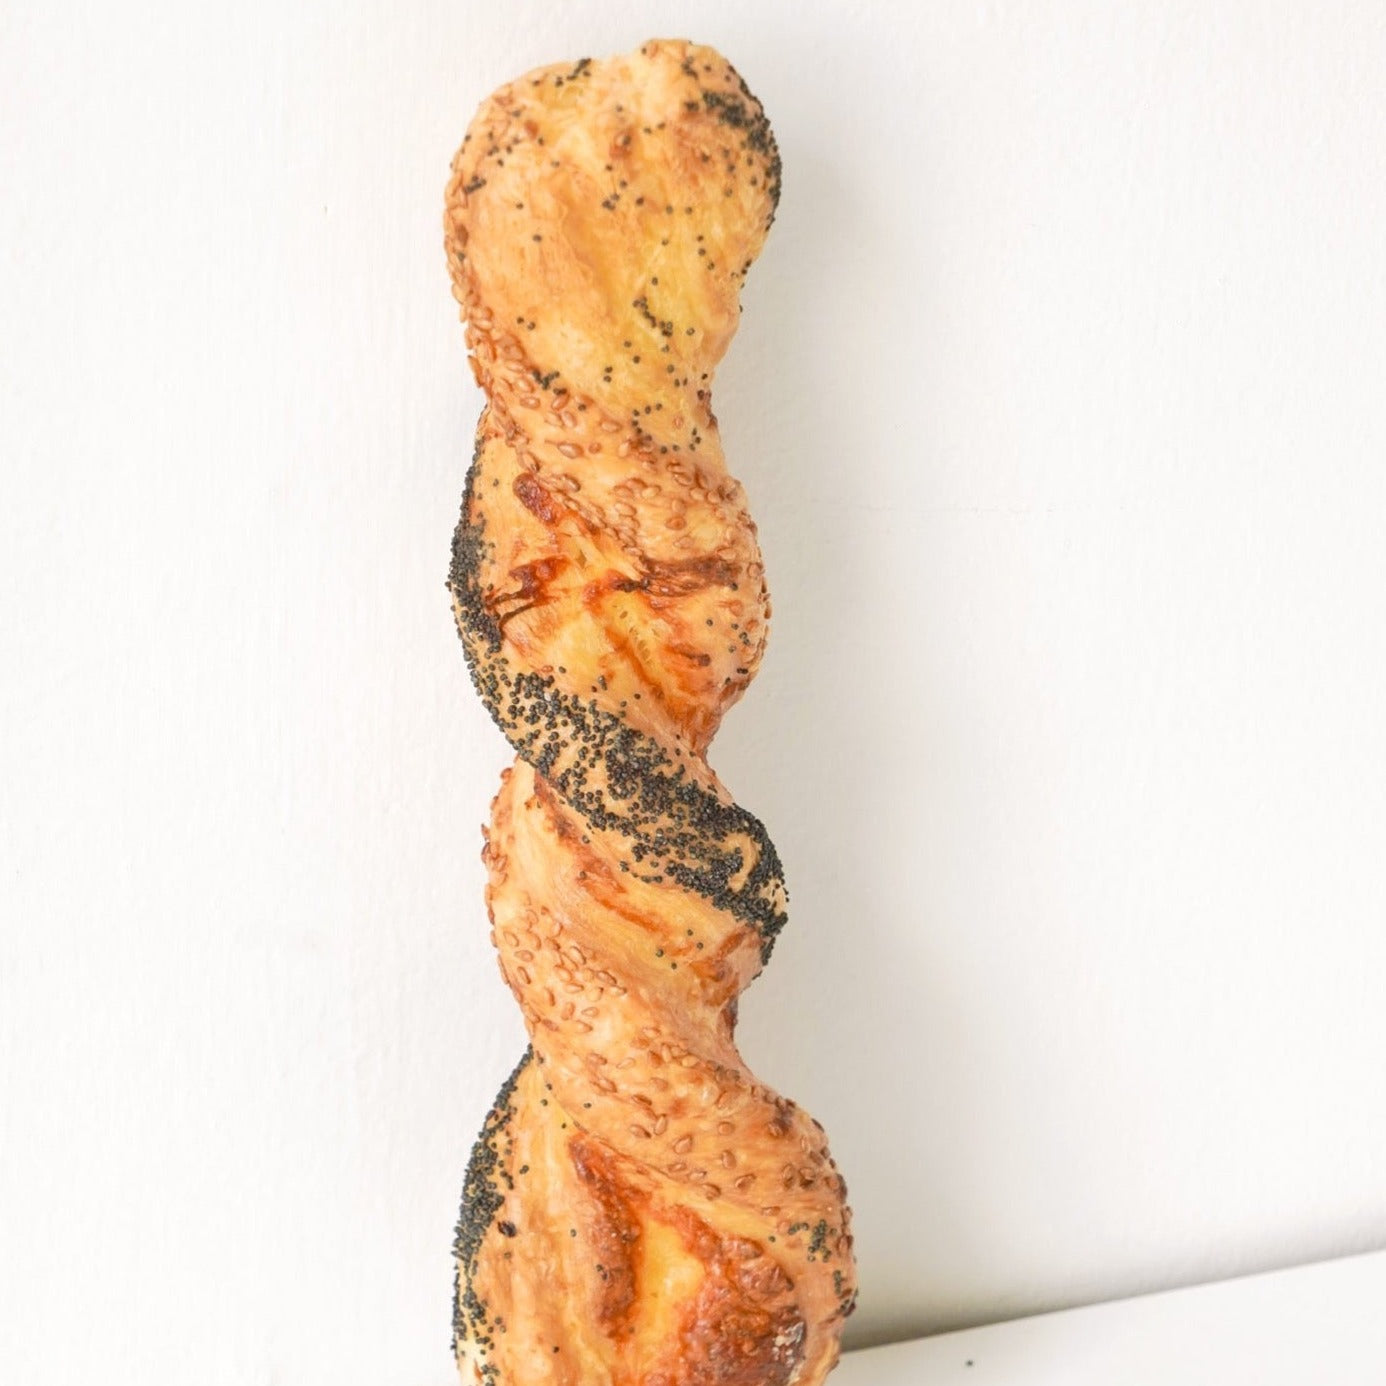 image of a cheese and black sesame pastry that has been twisted